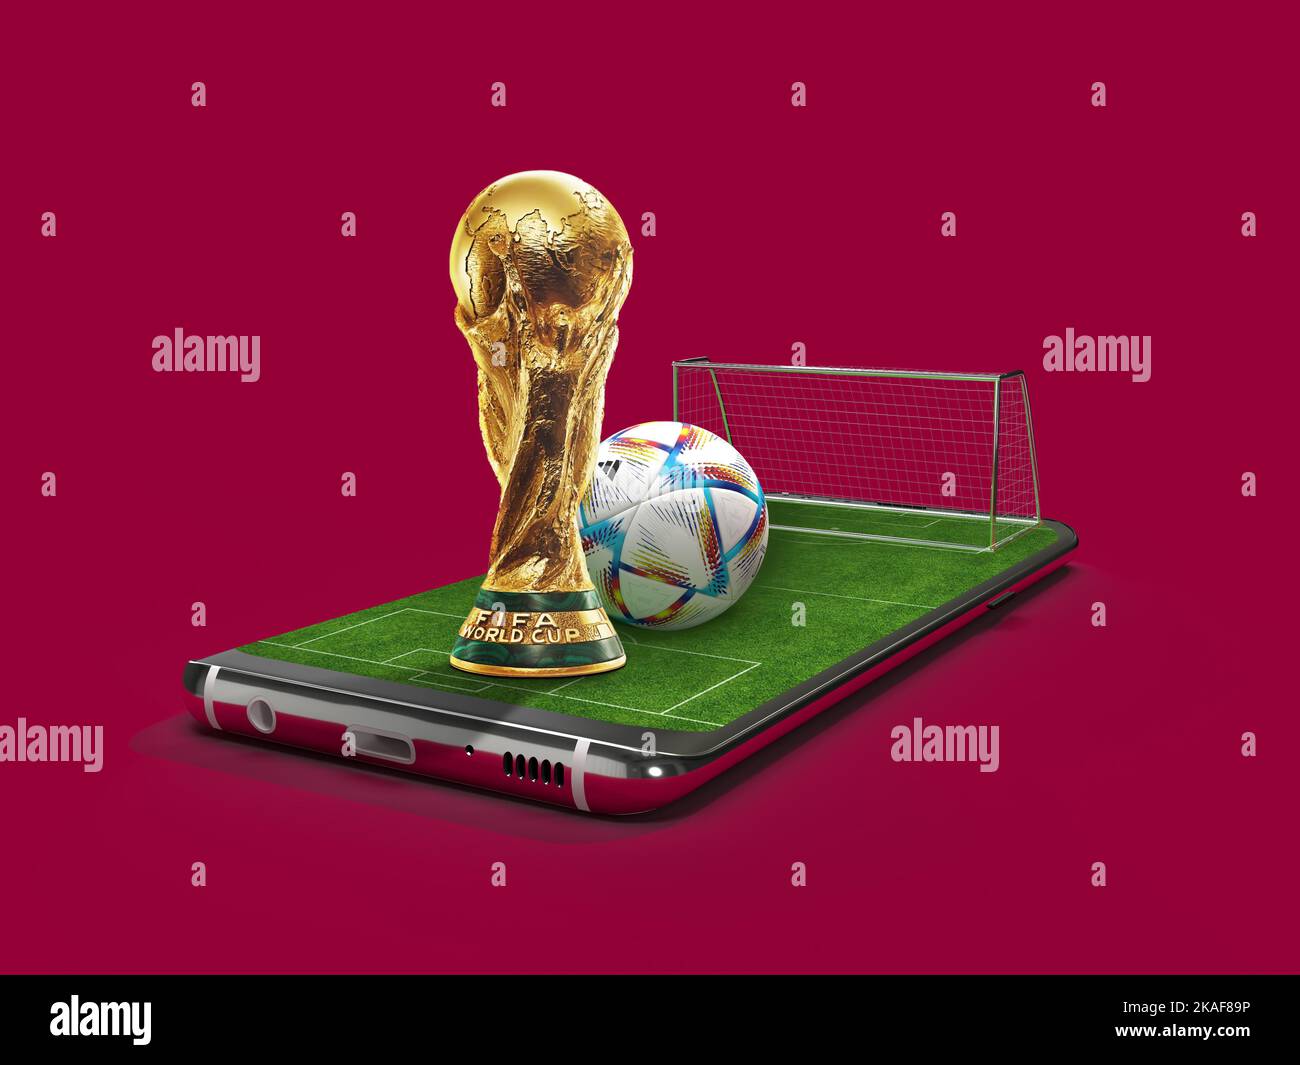 Fifa world cup 2022 Mobile football with trophy soccer. Mobile sport play match